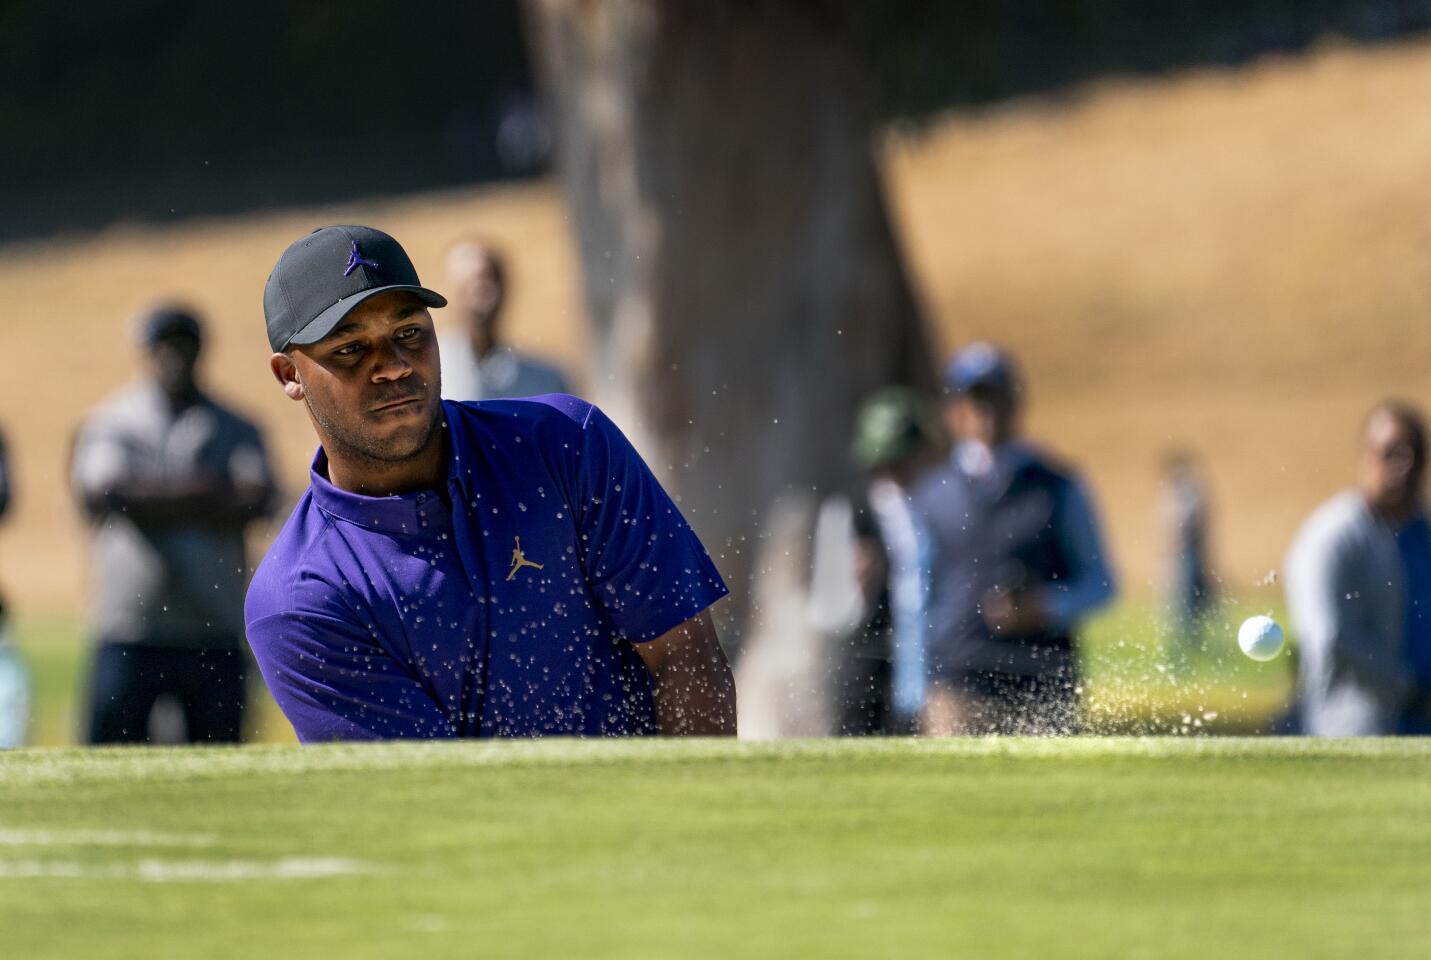 Harold Varner III hits out of a bunker and onto the 10th hole green during the final round of the Genesis Invitational at Riviera Country Club on Feb. 16, 2020.